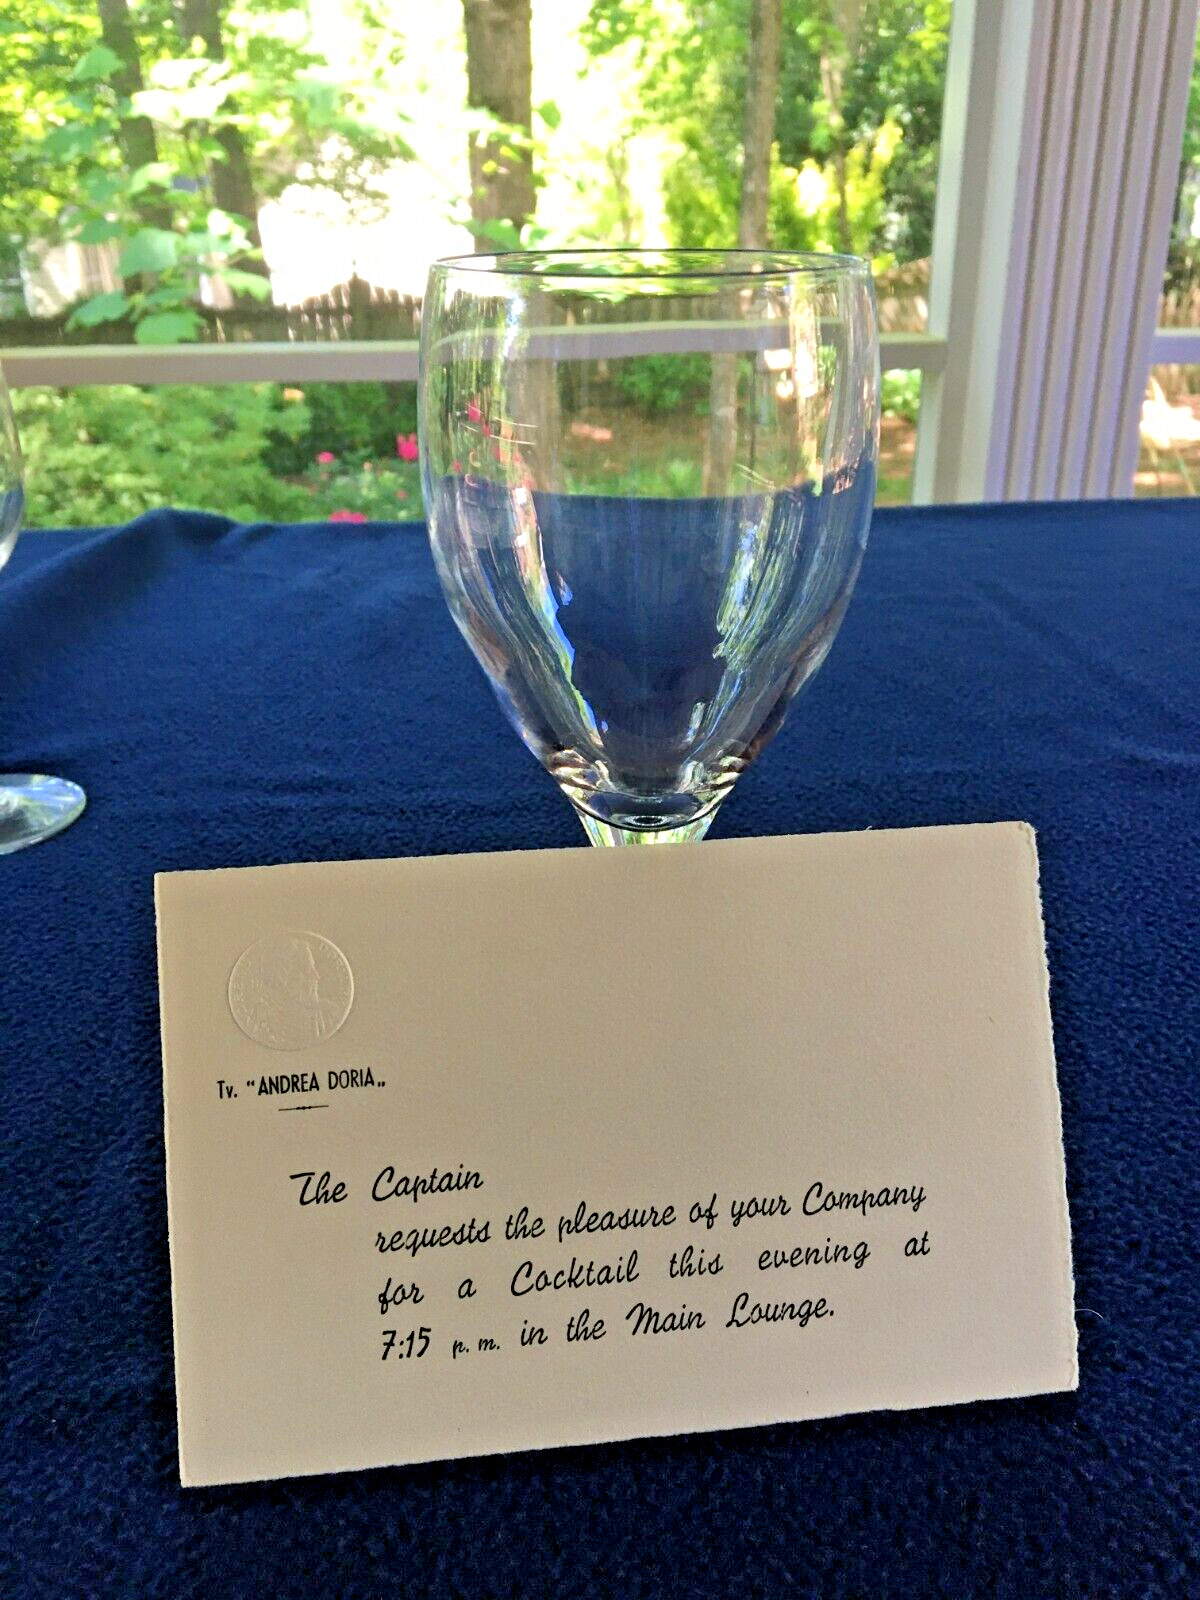 Onboard - Andrea Doria - Embossed Invitation from the Captain for a Cocktail